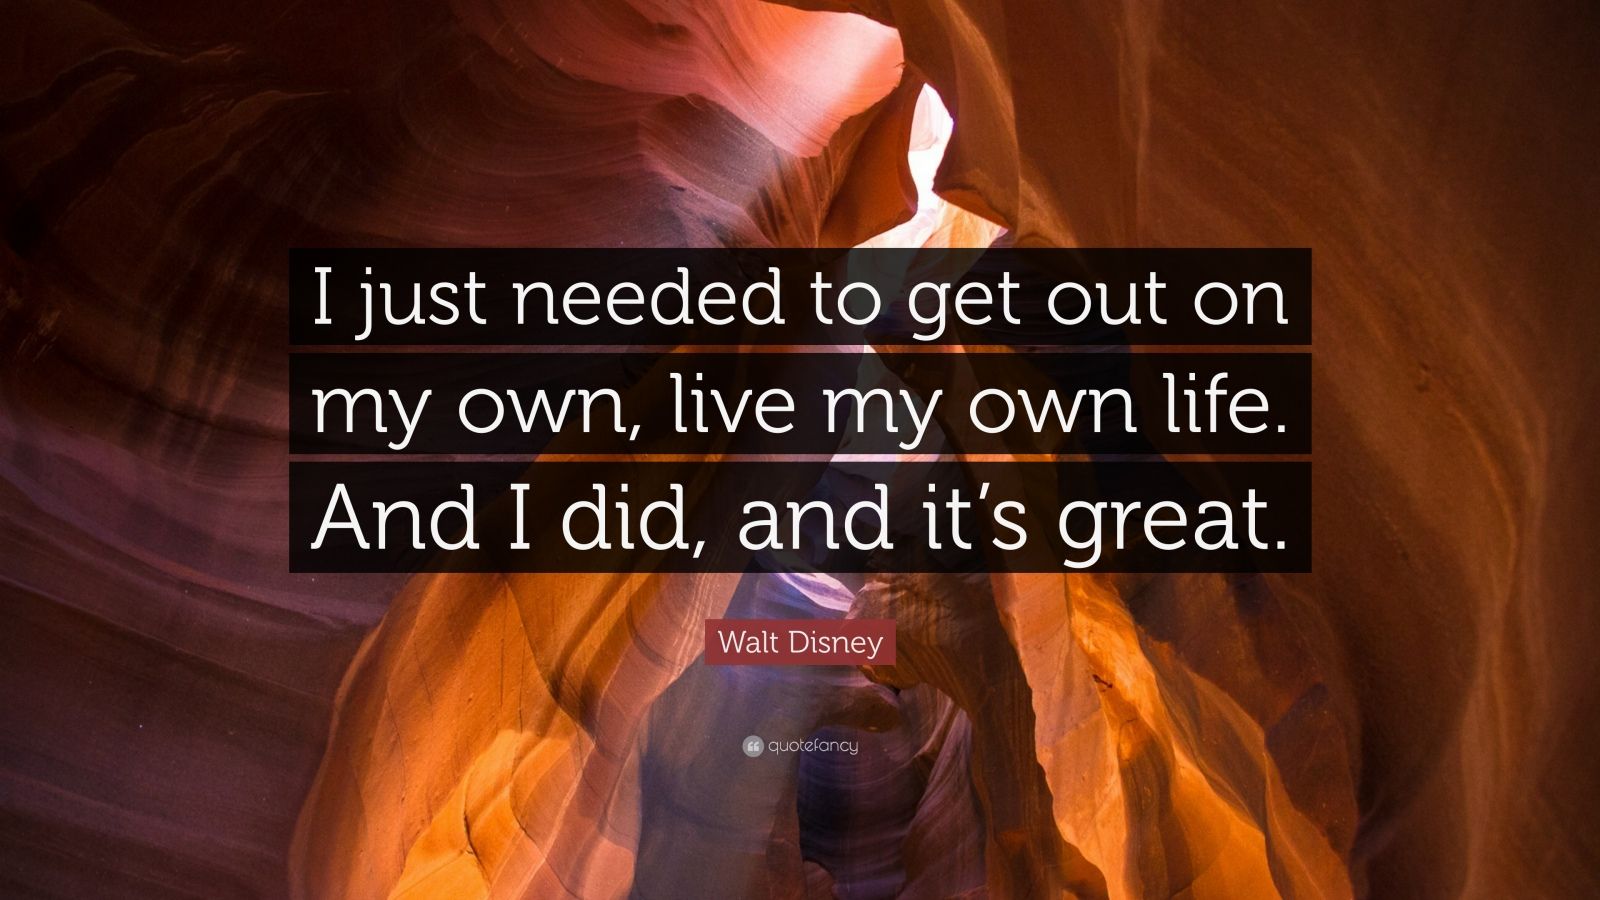 Walt Disney Quote “I just needed to out on my own live